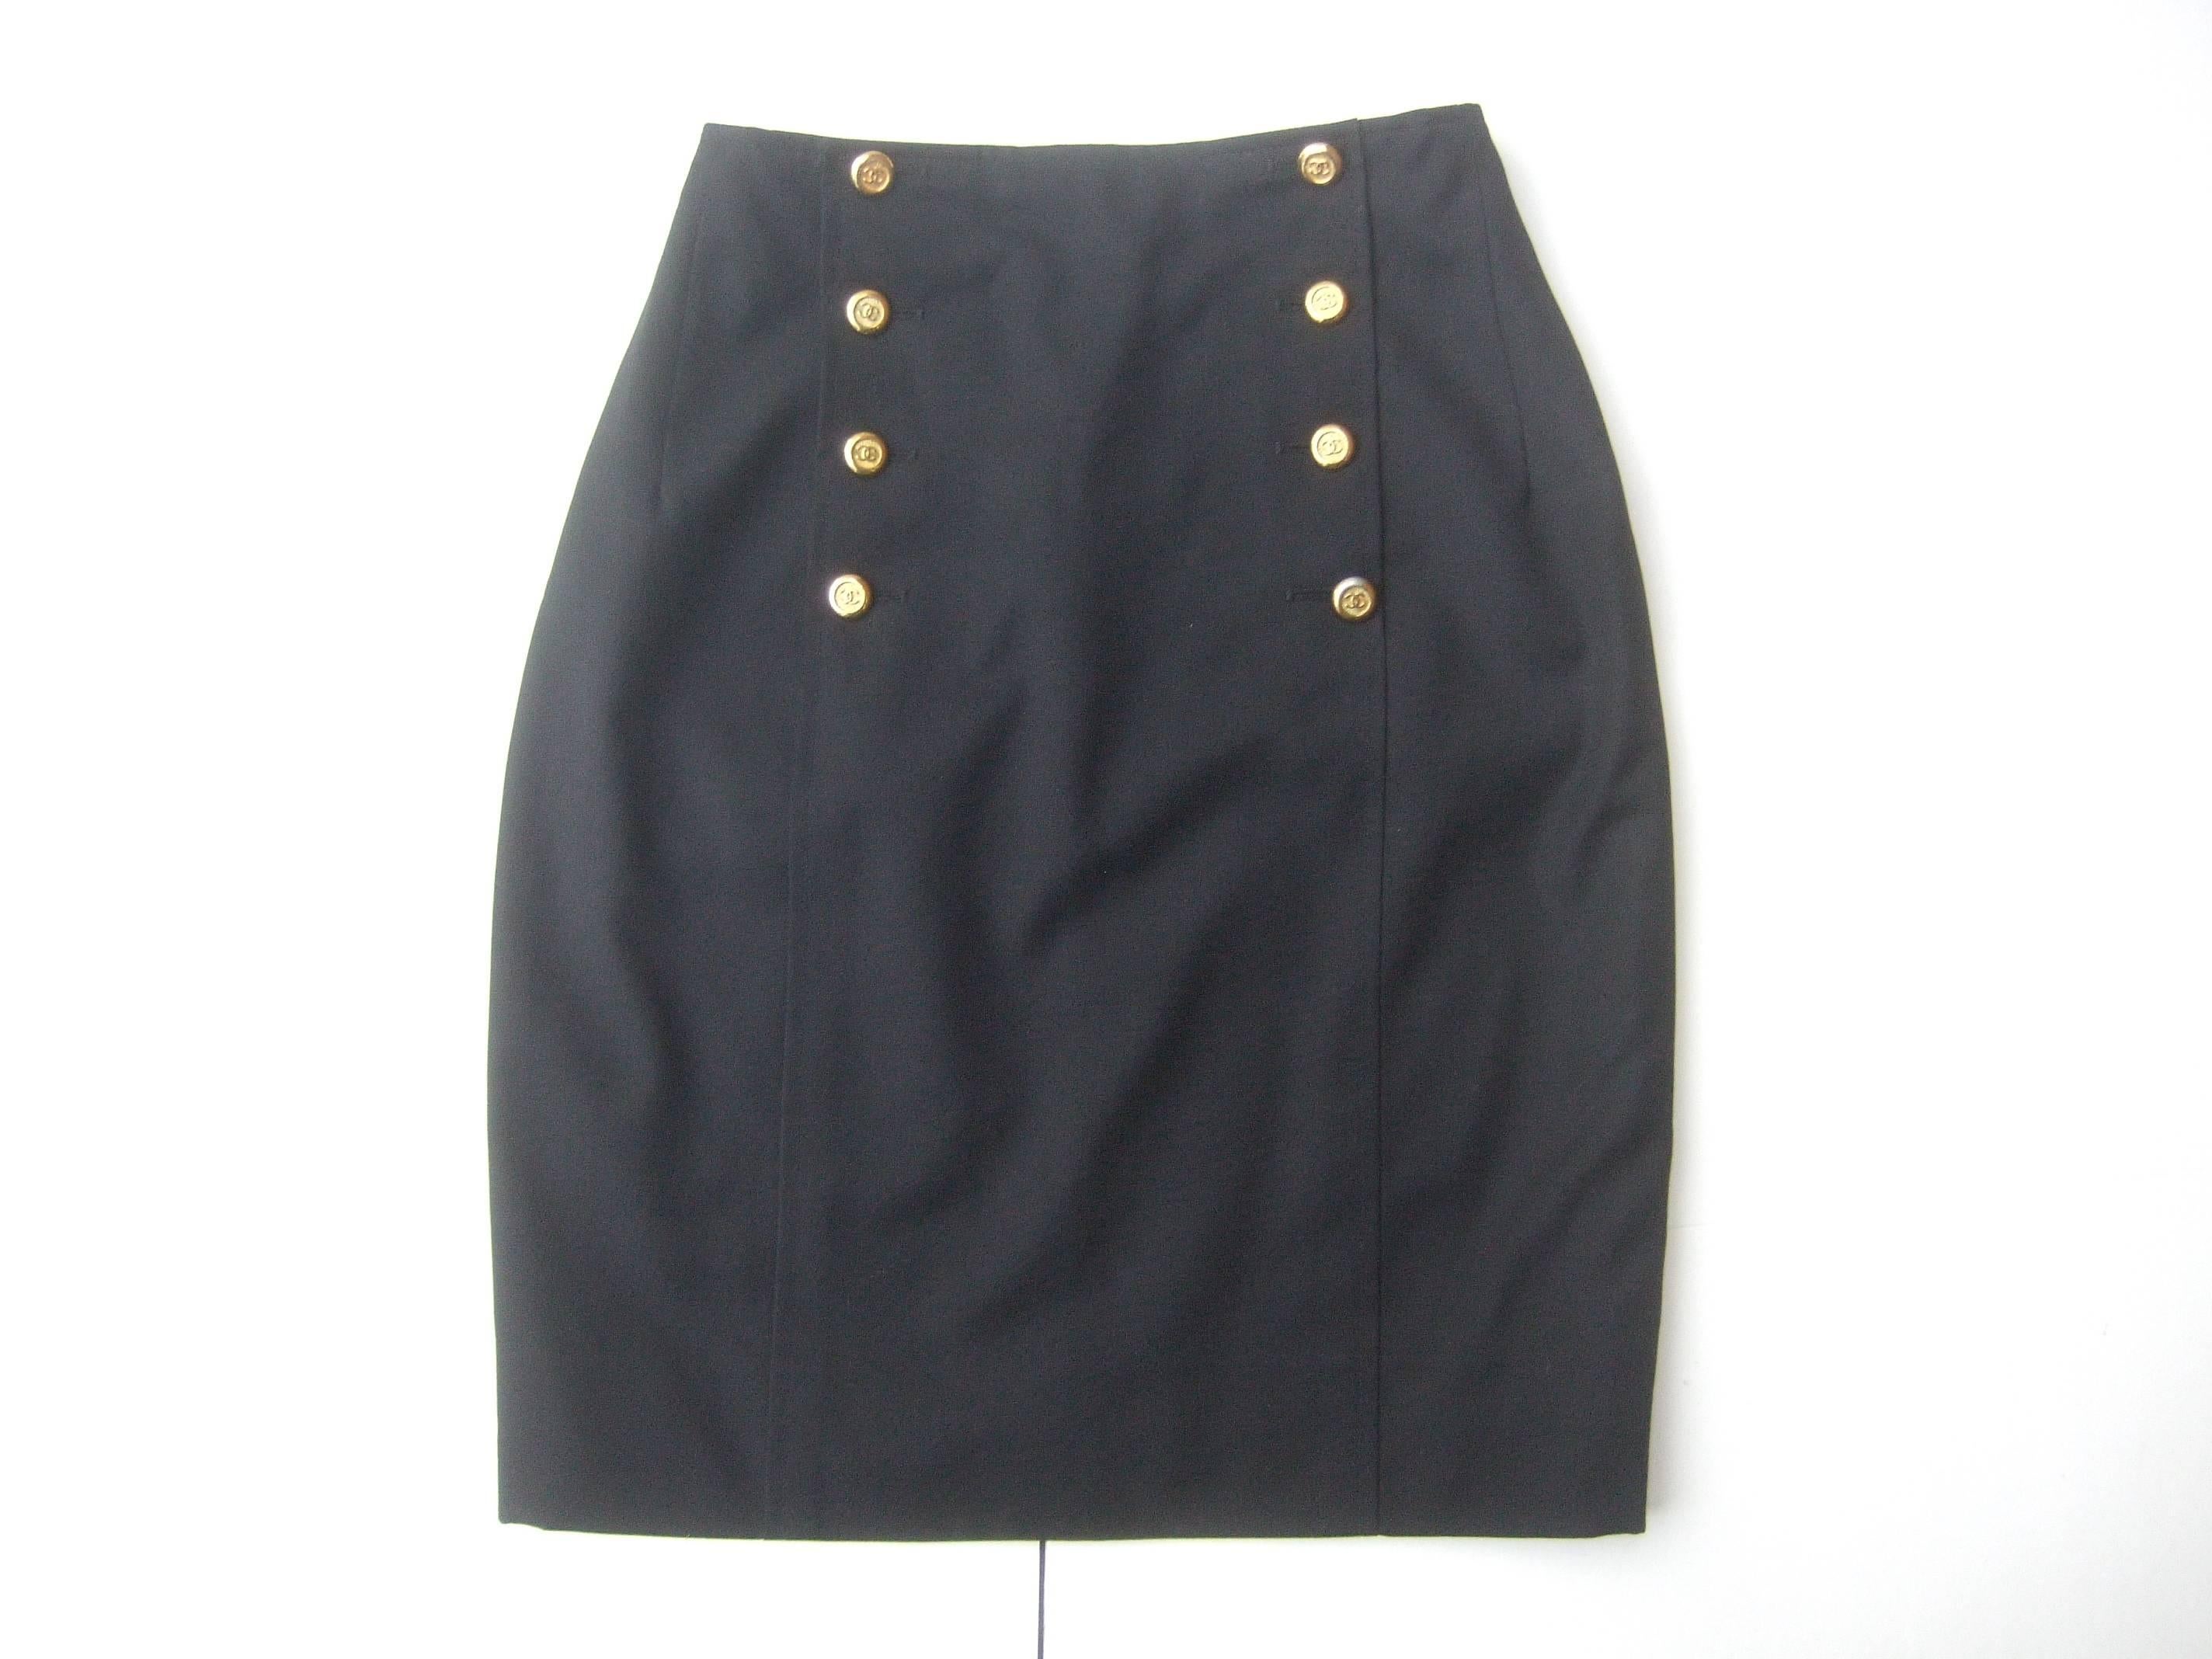 Women's Chanel Boutique Dark Blue Wool Pencil Skirt with Chanel Buttons c 1990s